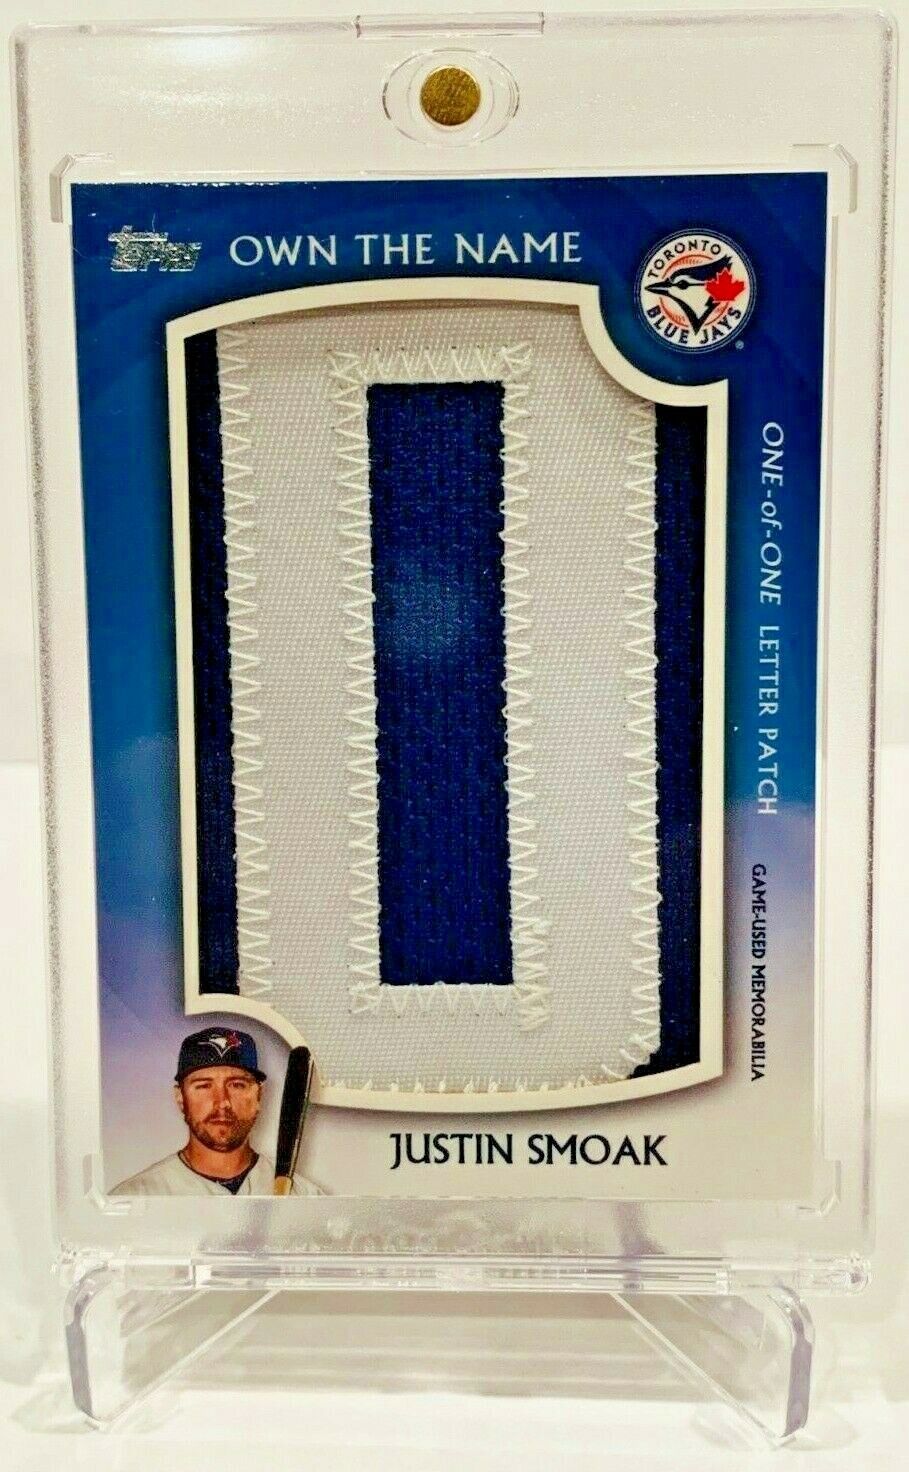 Justin Smoak 2019 Topps Update Series Own The Name Nameplate Letter Patch 1/1